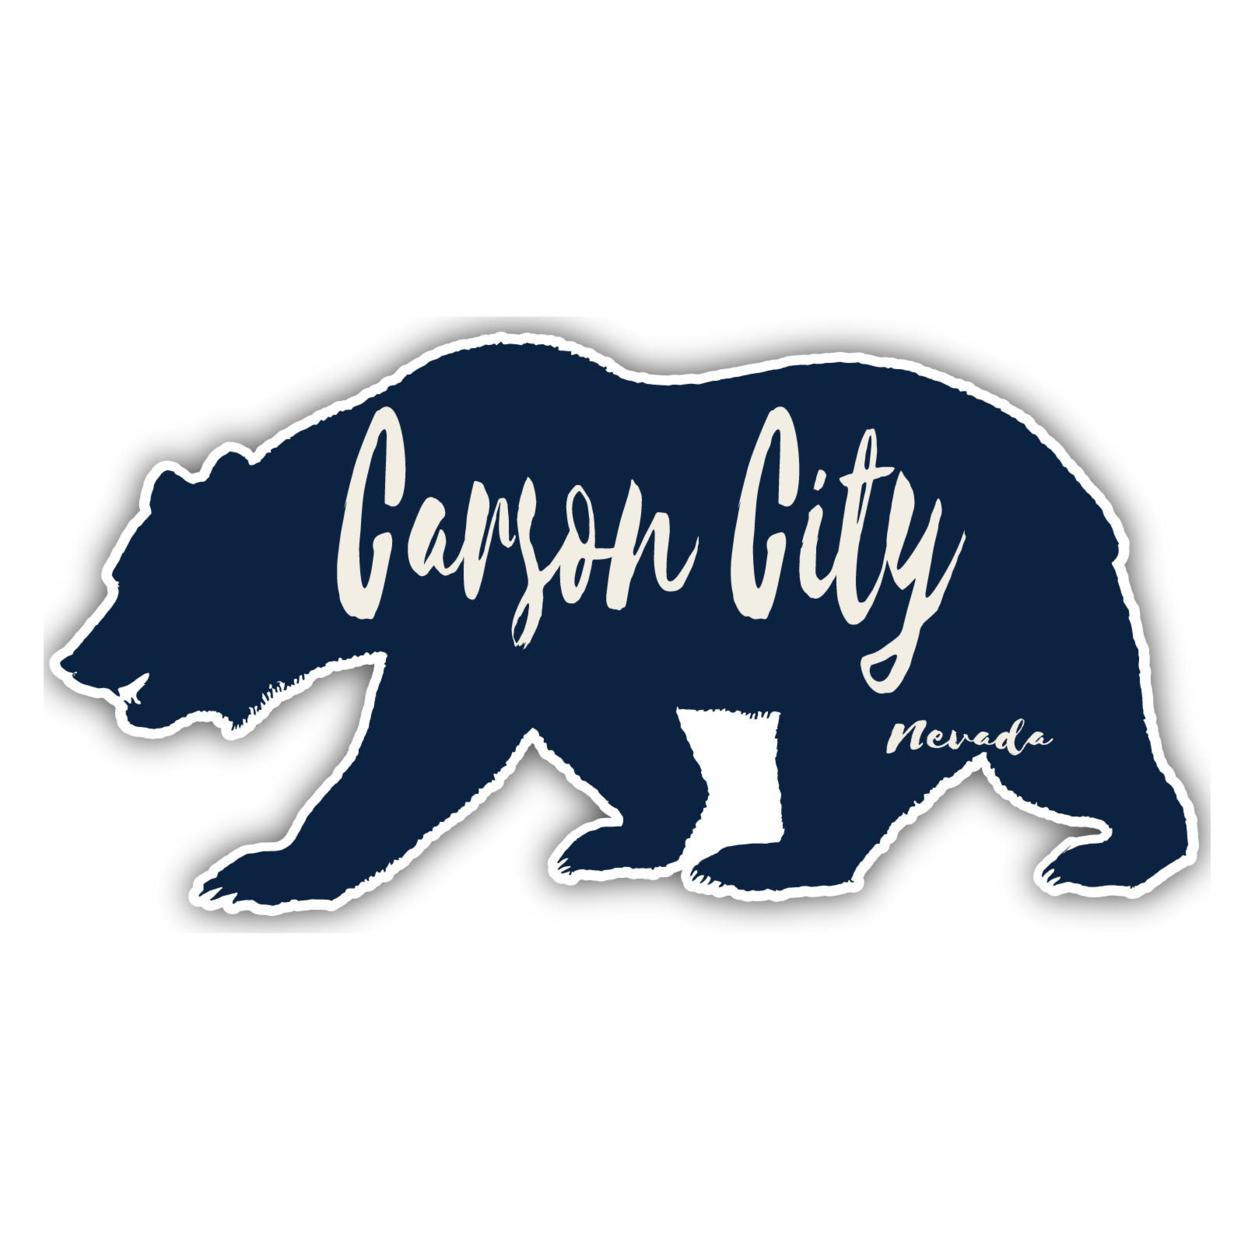 Carson City Nevada Souvenir Decorative Stickers (Choose Theme And Size) - 4-Pack, 4-Inch, Tent